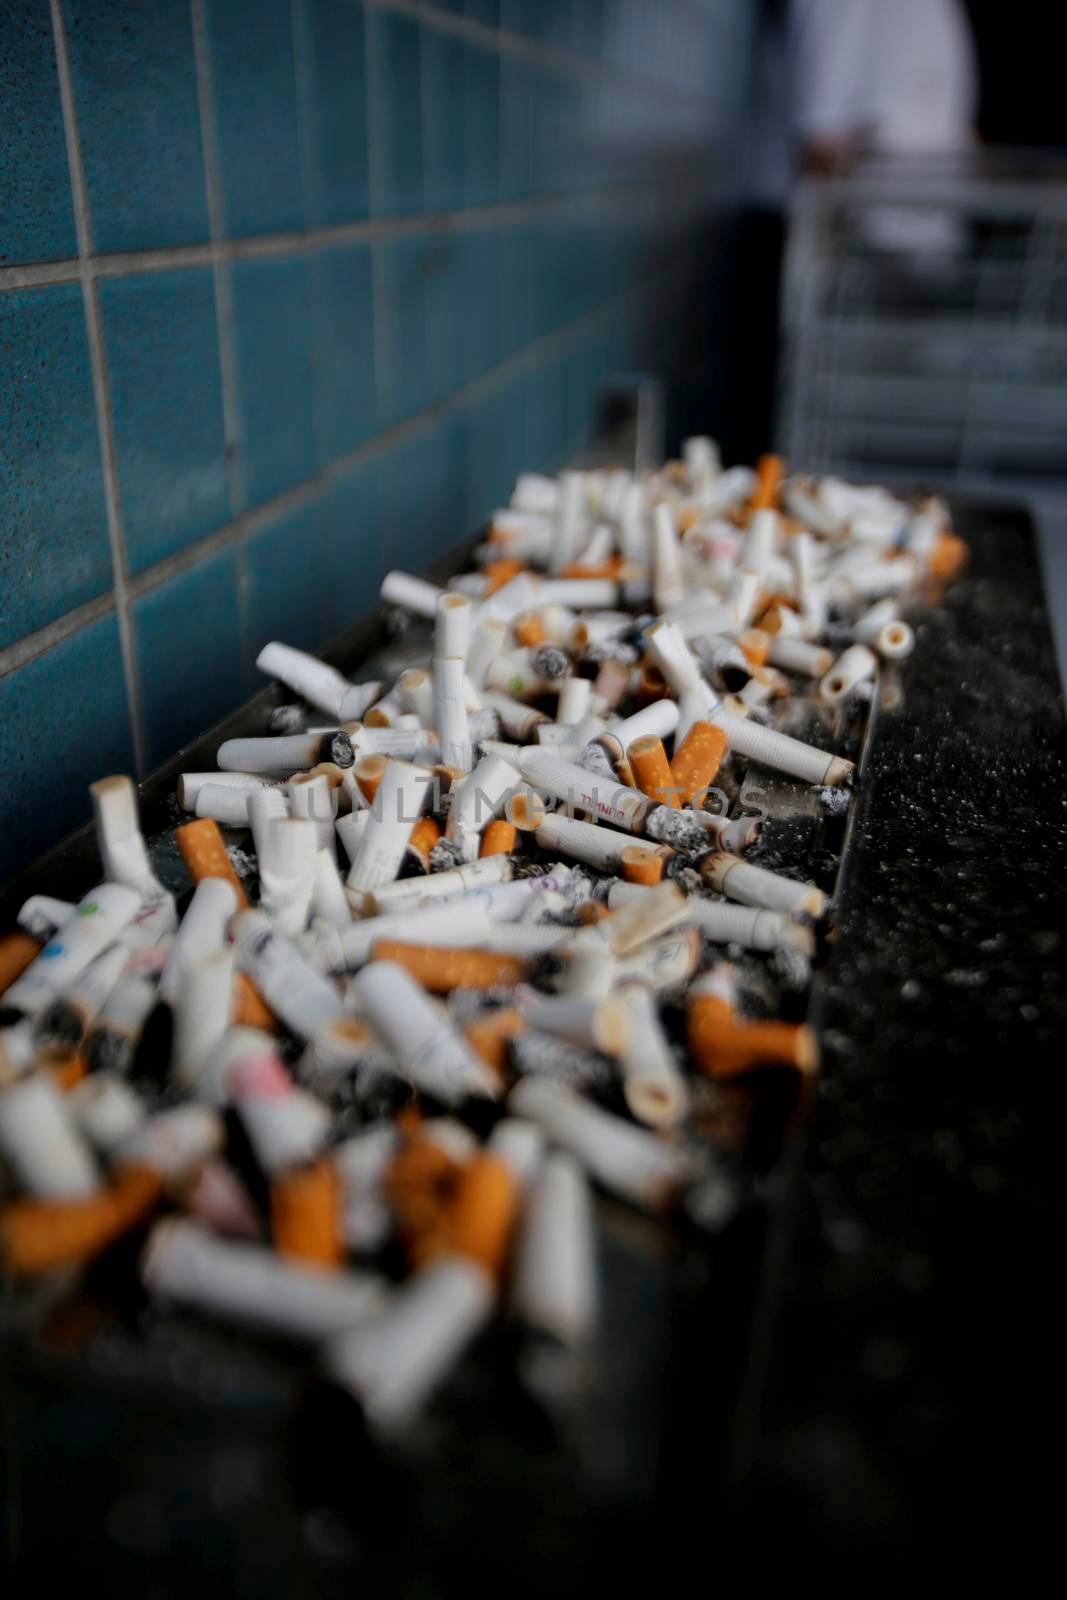 salvador, bahia / brazil - june 14, 2018: cinceiro with cigarette butts is seen outside the airport of the city of Salvador.
